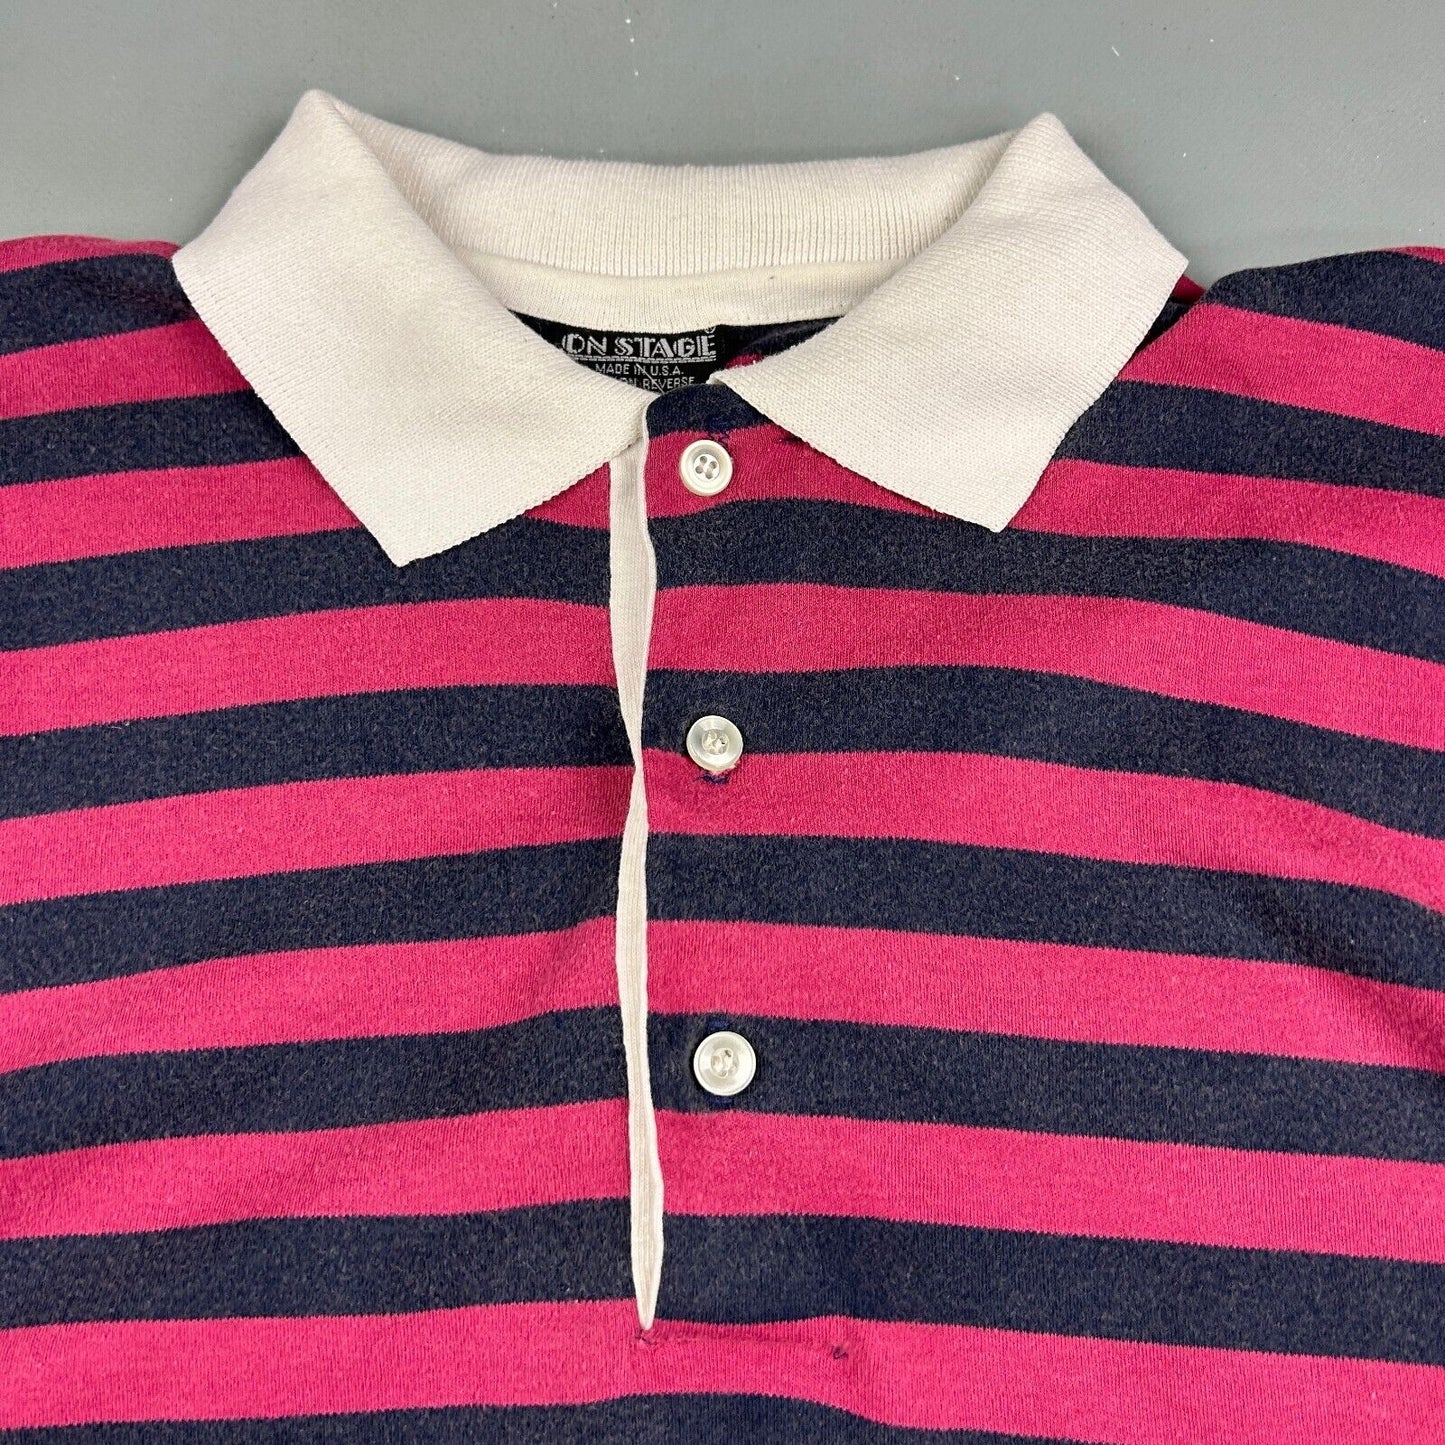 VINTAGE 90s On Stage Striped Polo Shirt sz M - L Adult